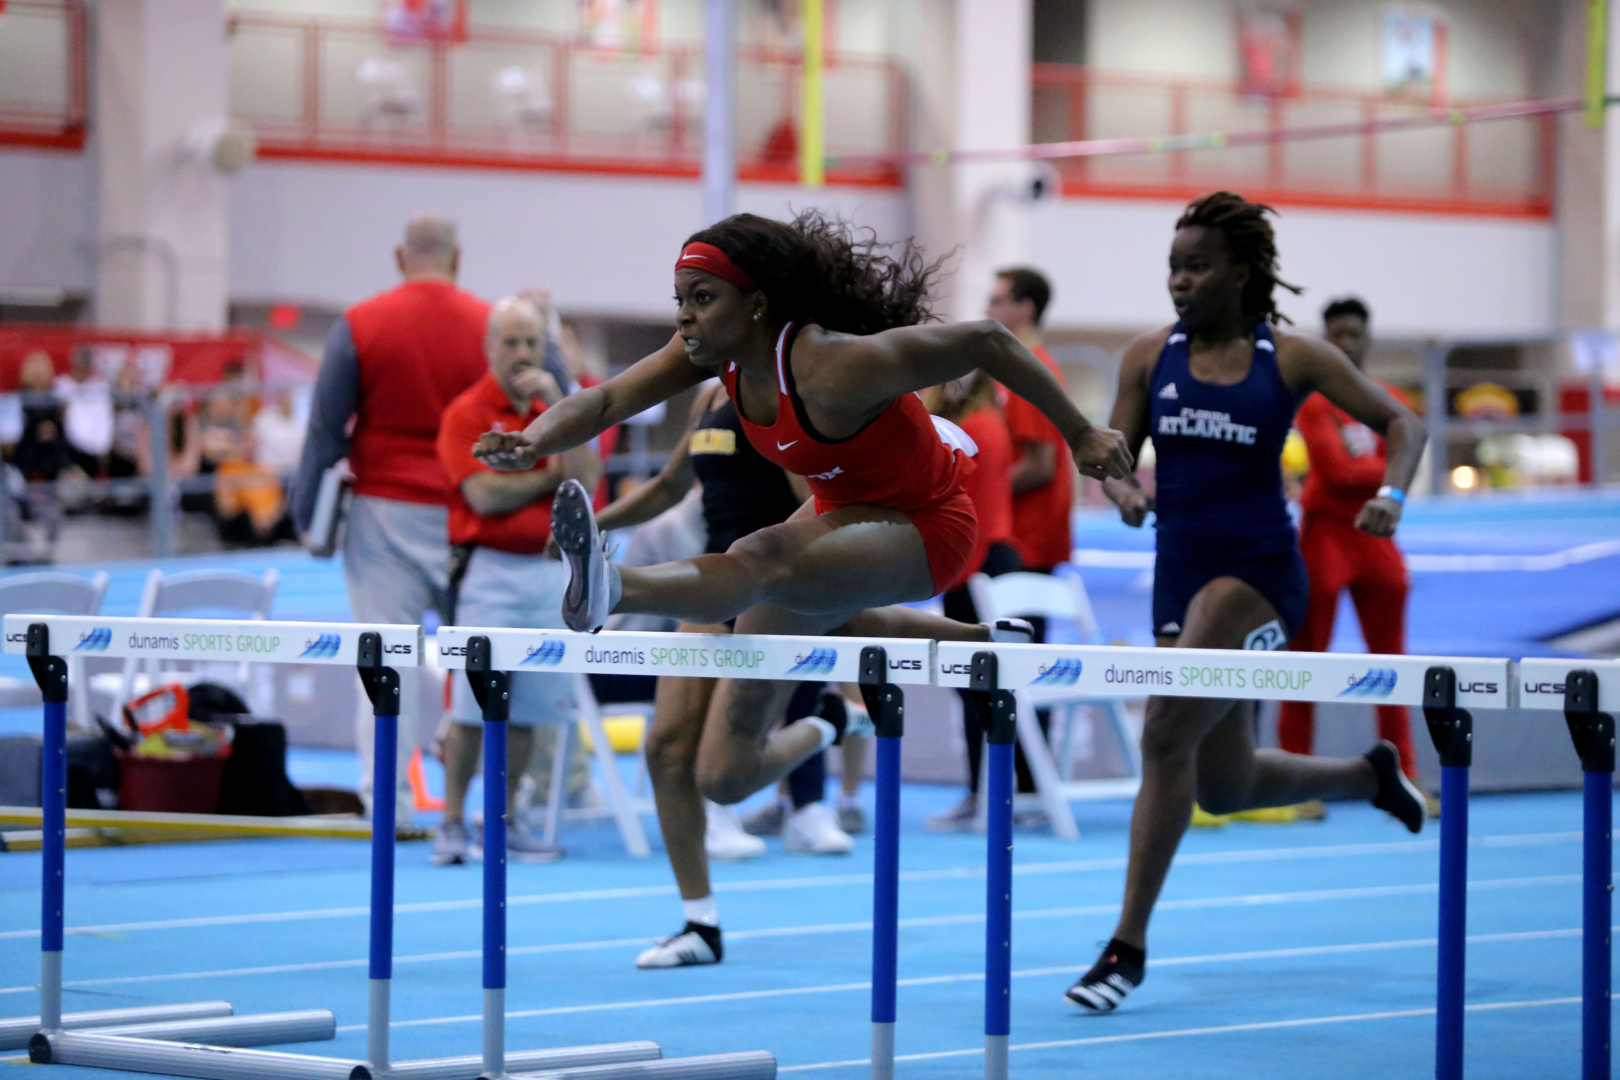 Naomi Taylor's 8.03 finish in The 2020 American Indoor Track and Field Championships | Photo courtesy of UH Athletics